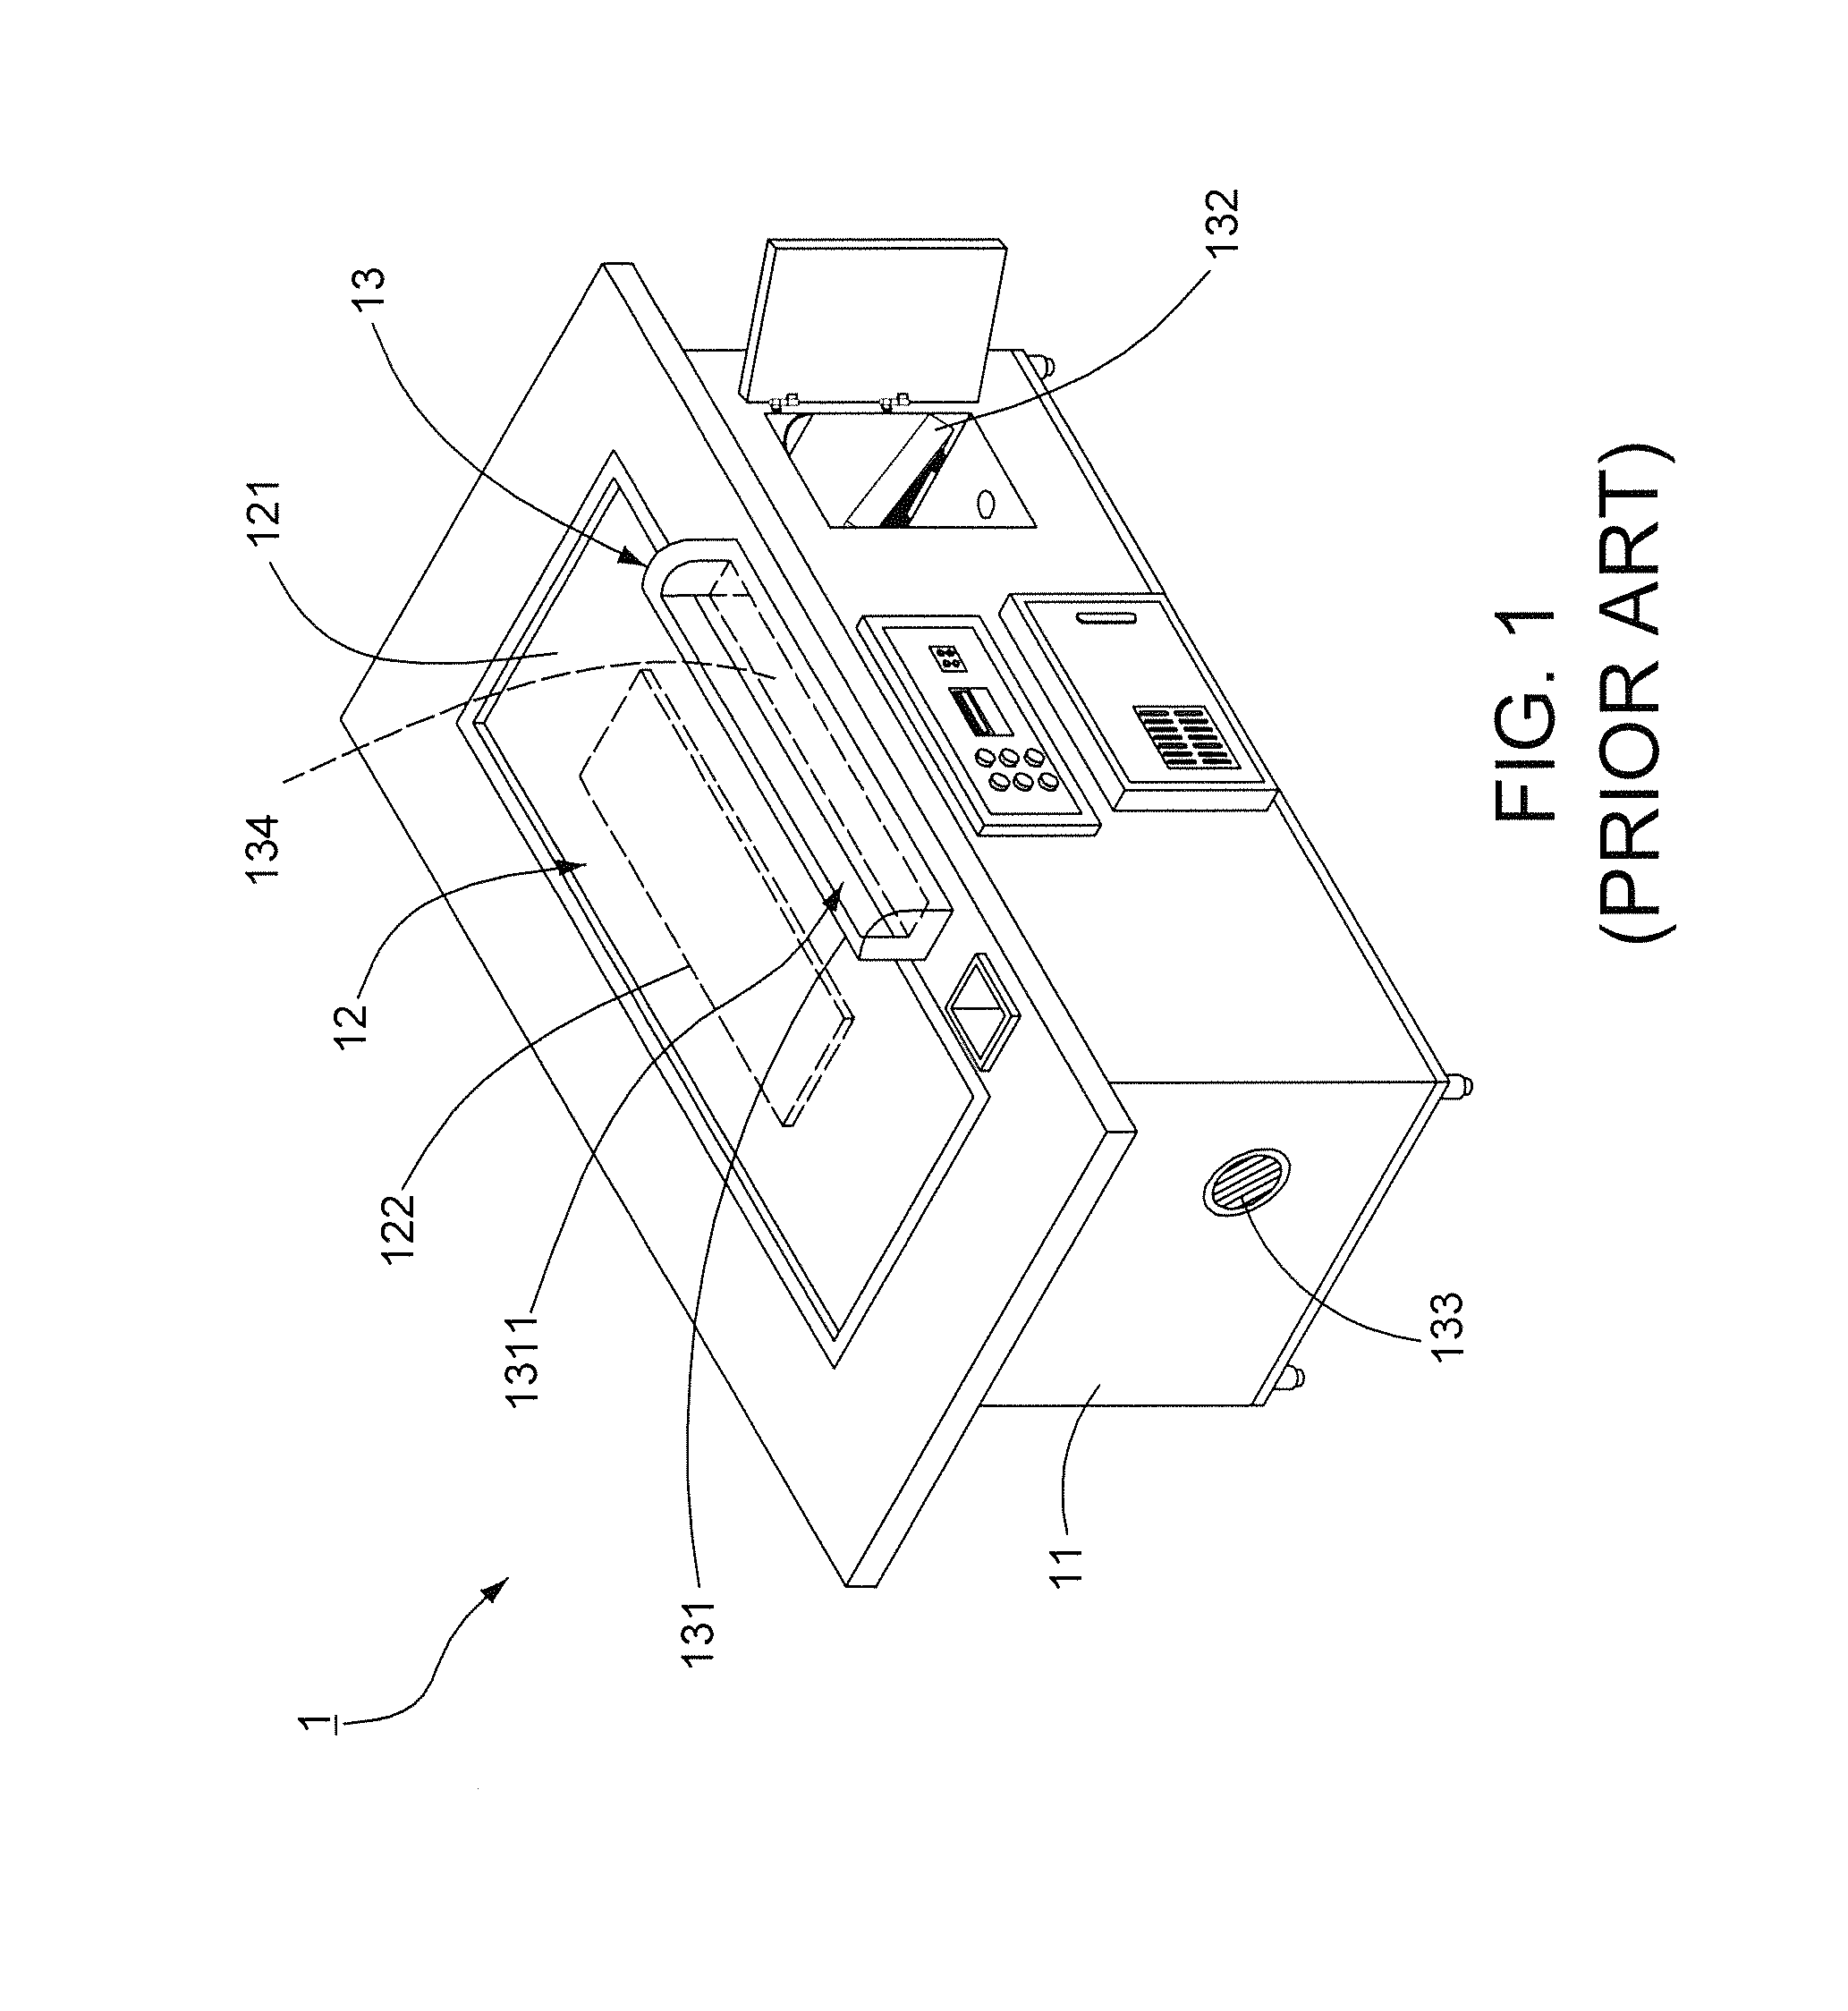 Assembly for cooking with a safety device